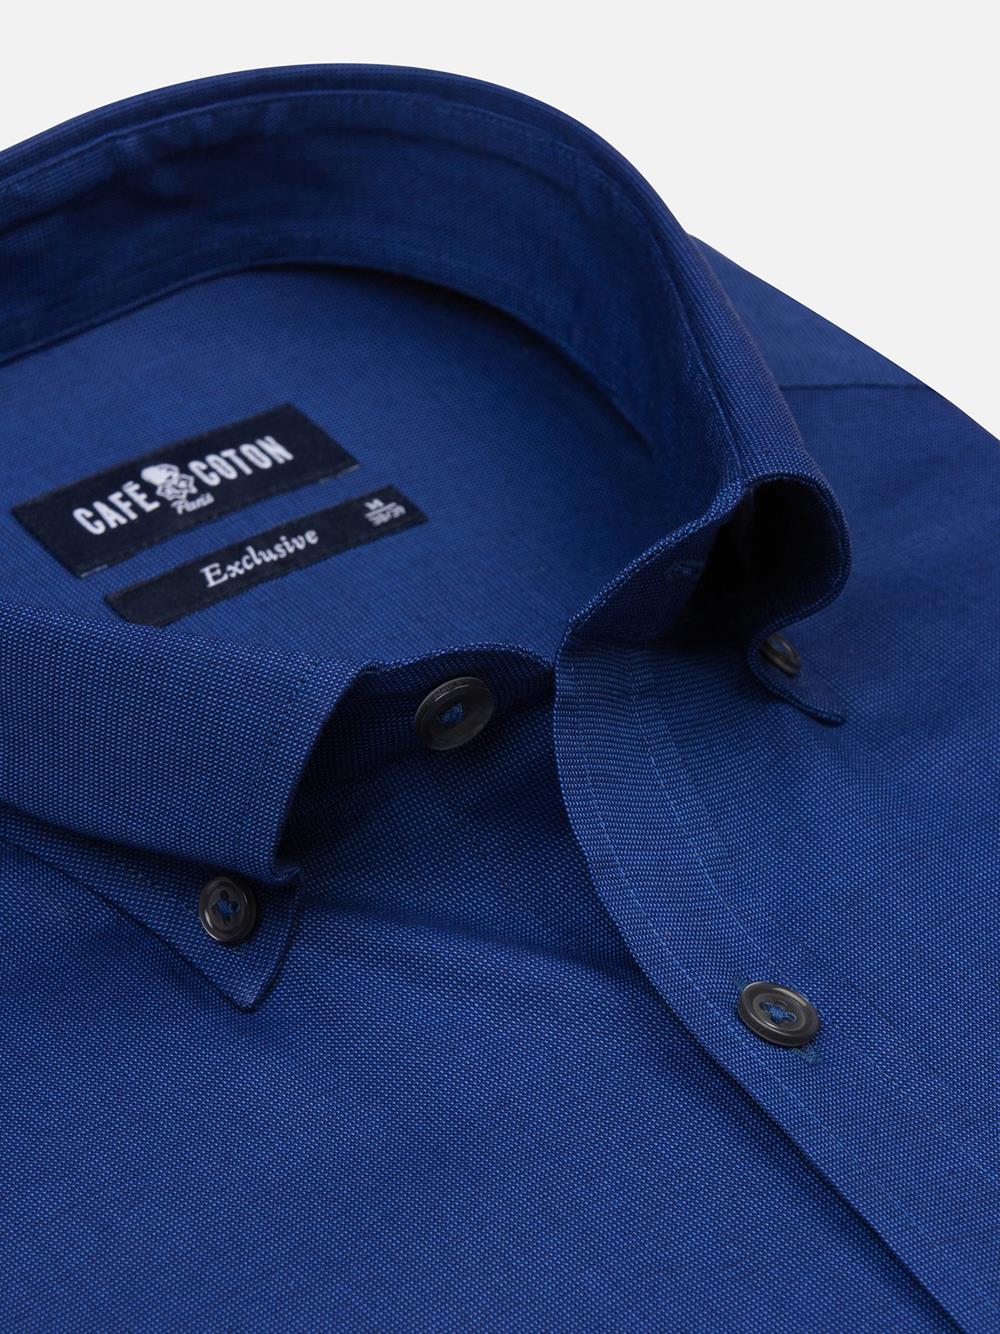 Bob grey fitted shirt - Buttoned collar